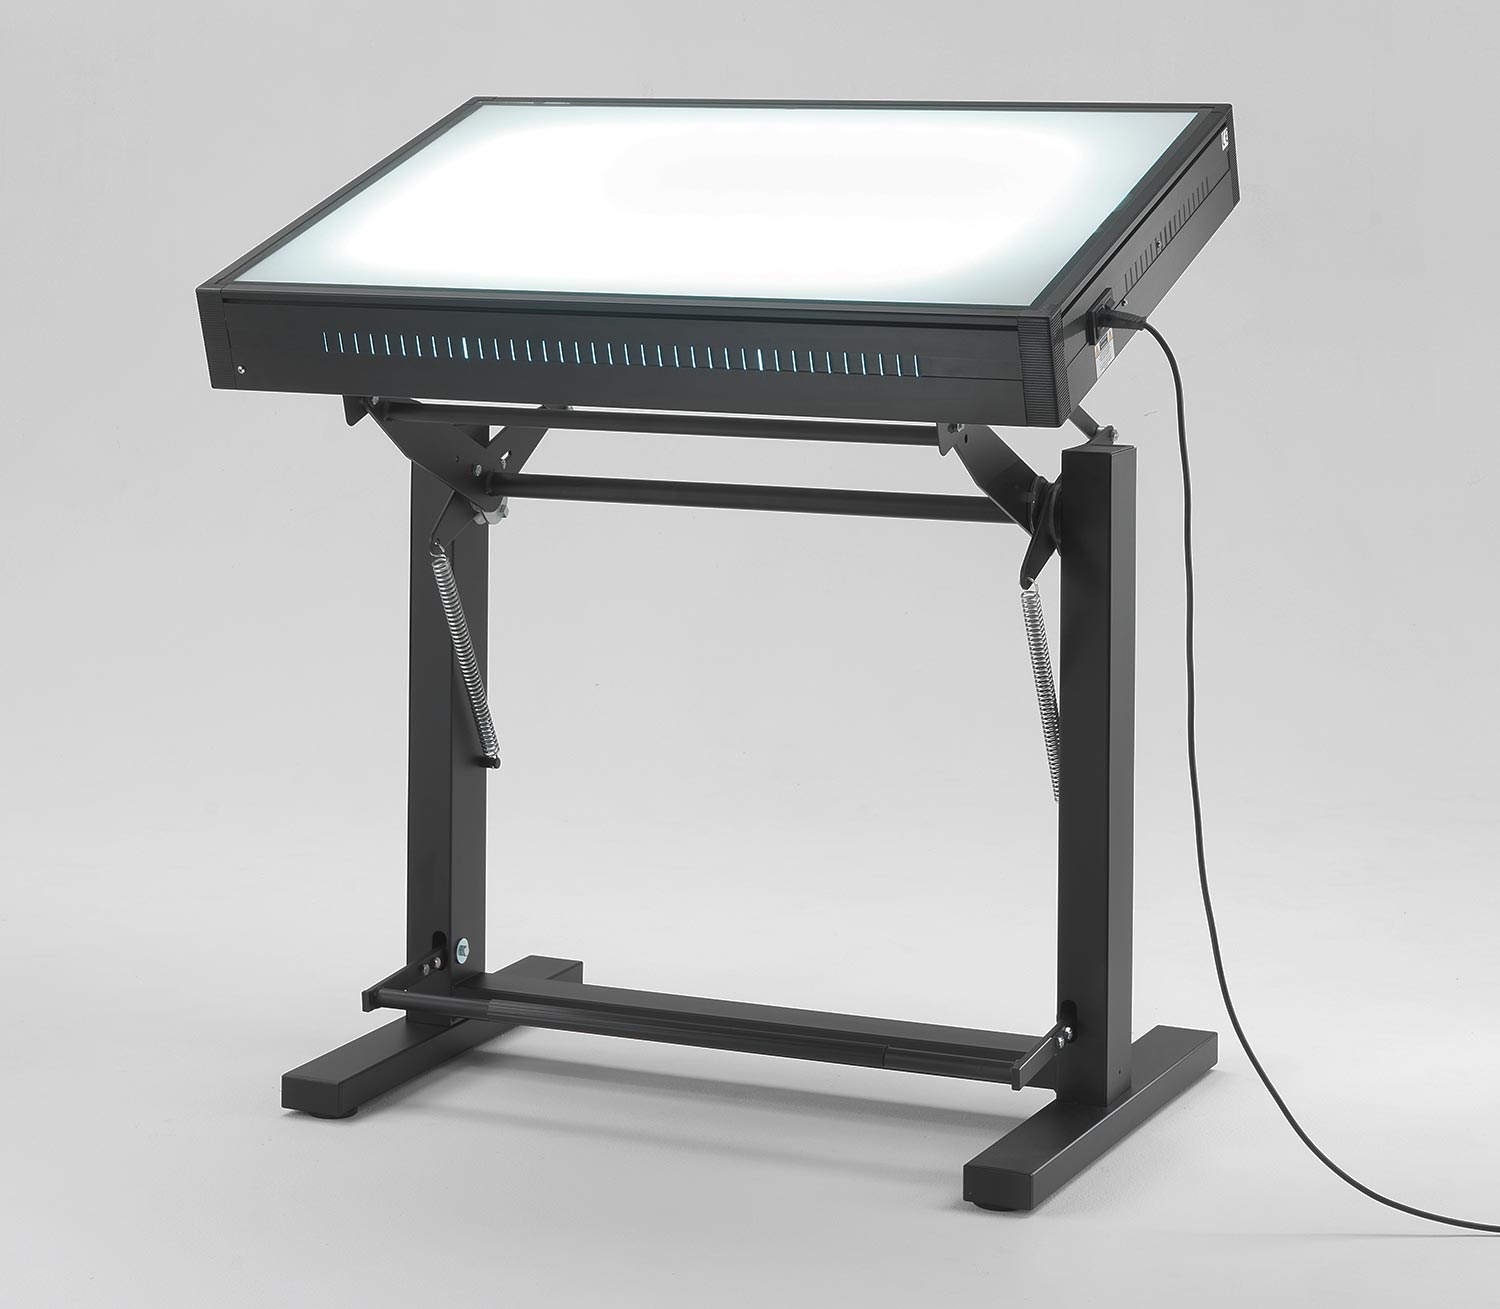 Light Tables and Light Boxes for drafting, architect, designer - Emme Italia